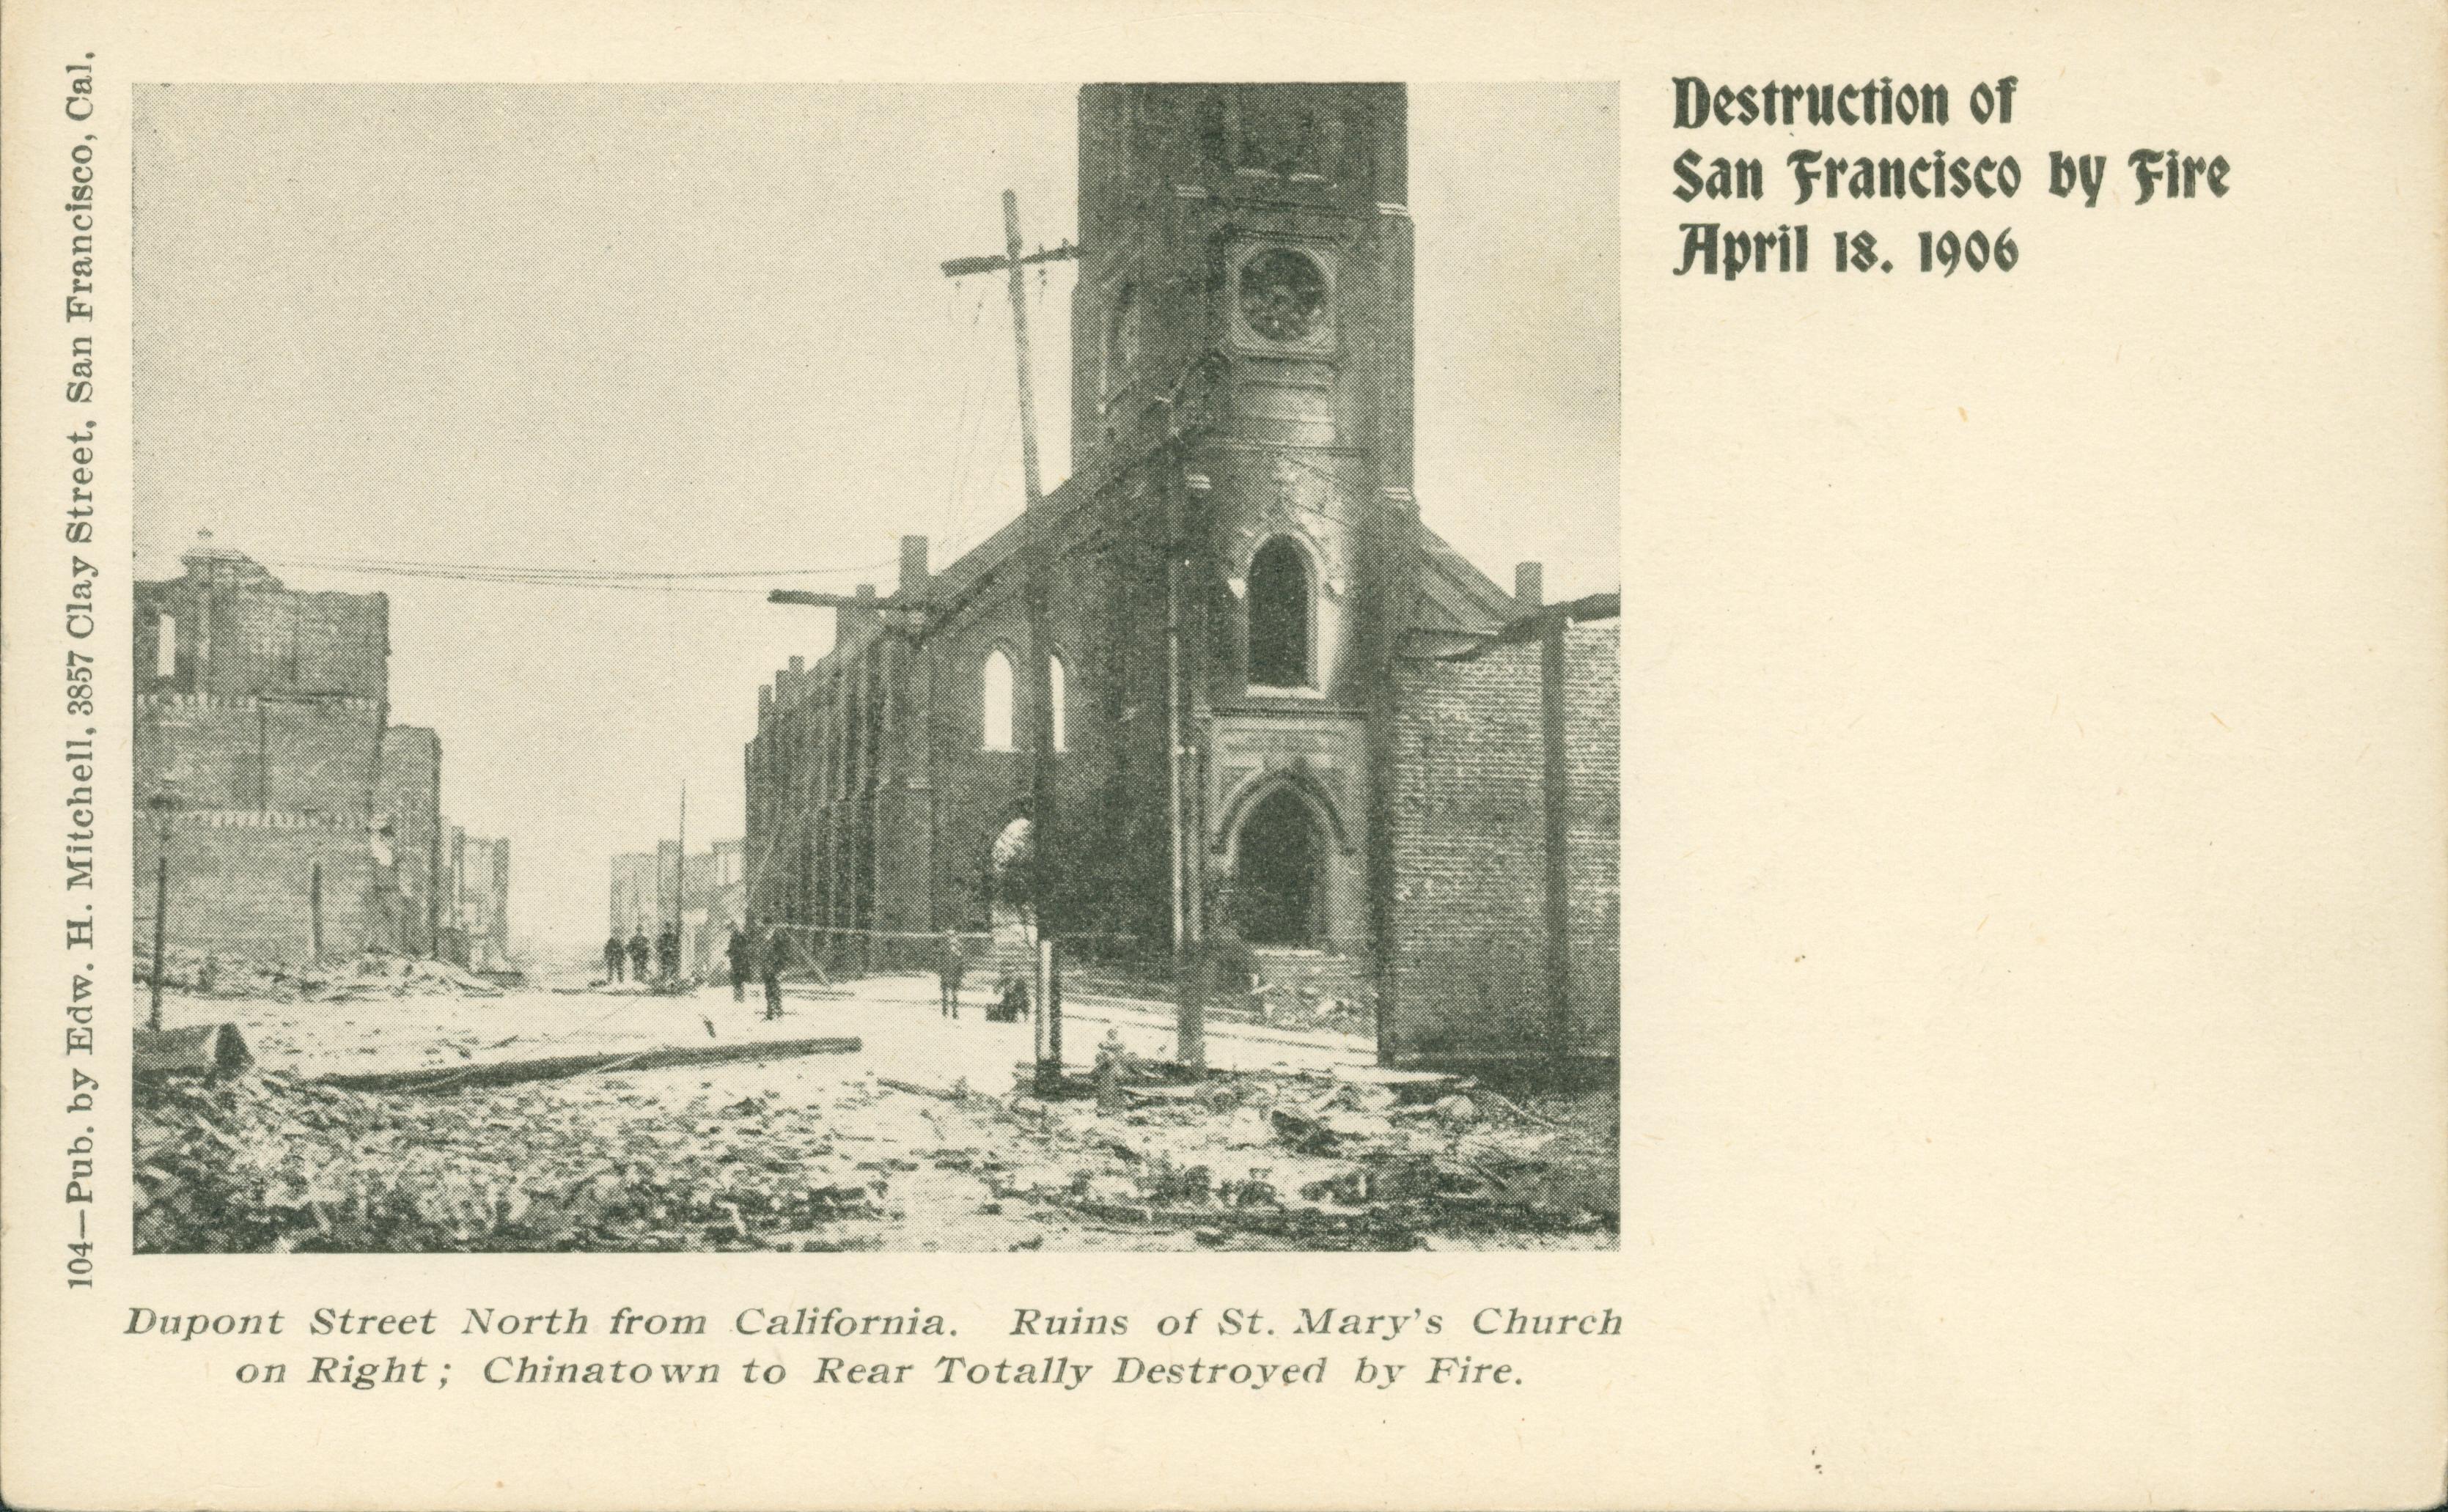 Shows the destruction of St. Mary's Church surrounded by other destroyed buildings.